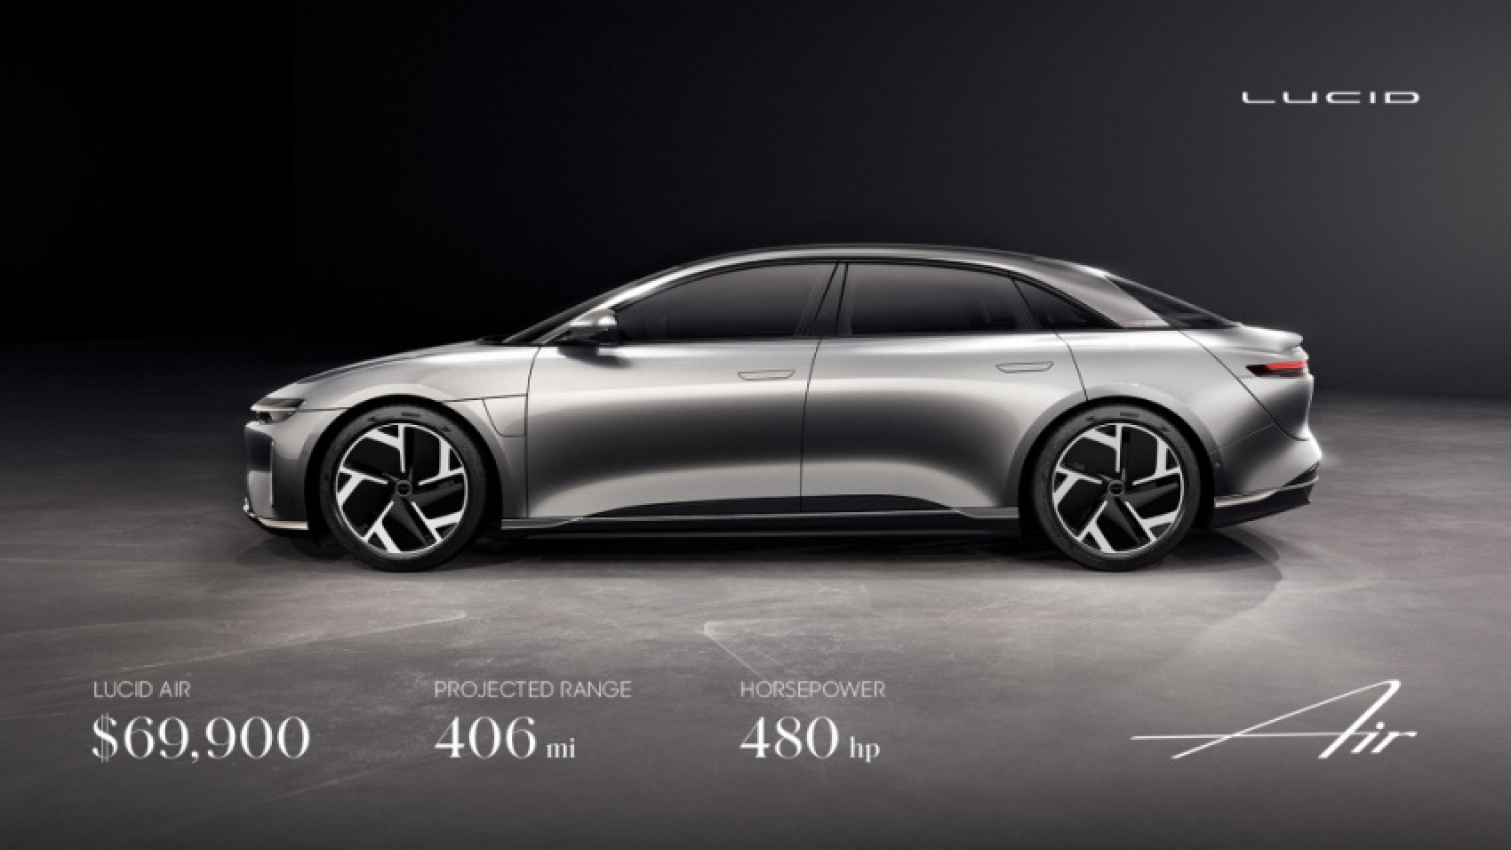 audi, autos, cars, lucid, electric cars, lucid confirms saudi arabia plant for 2025, “ultra-high-efficiency” gravity suv for 2024